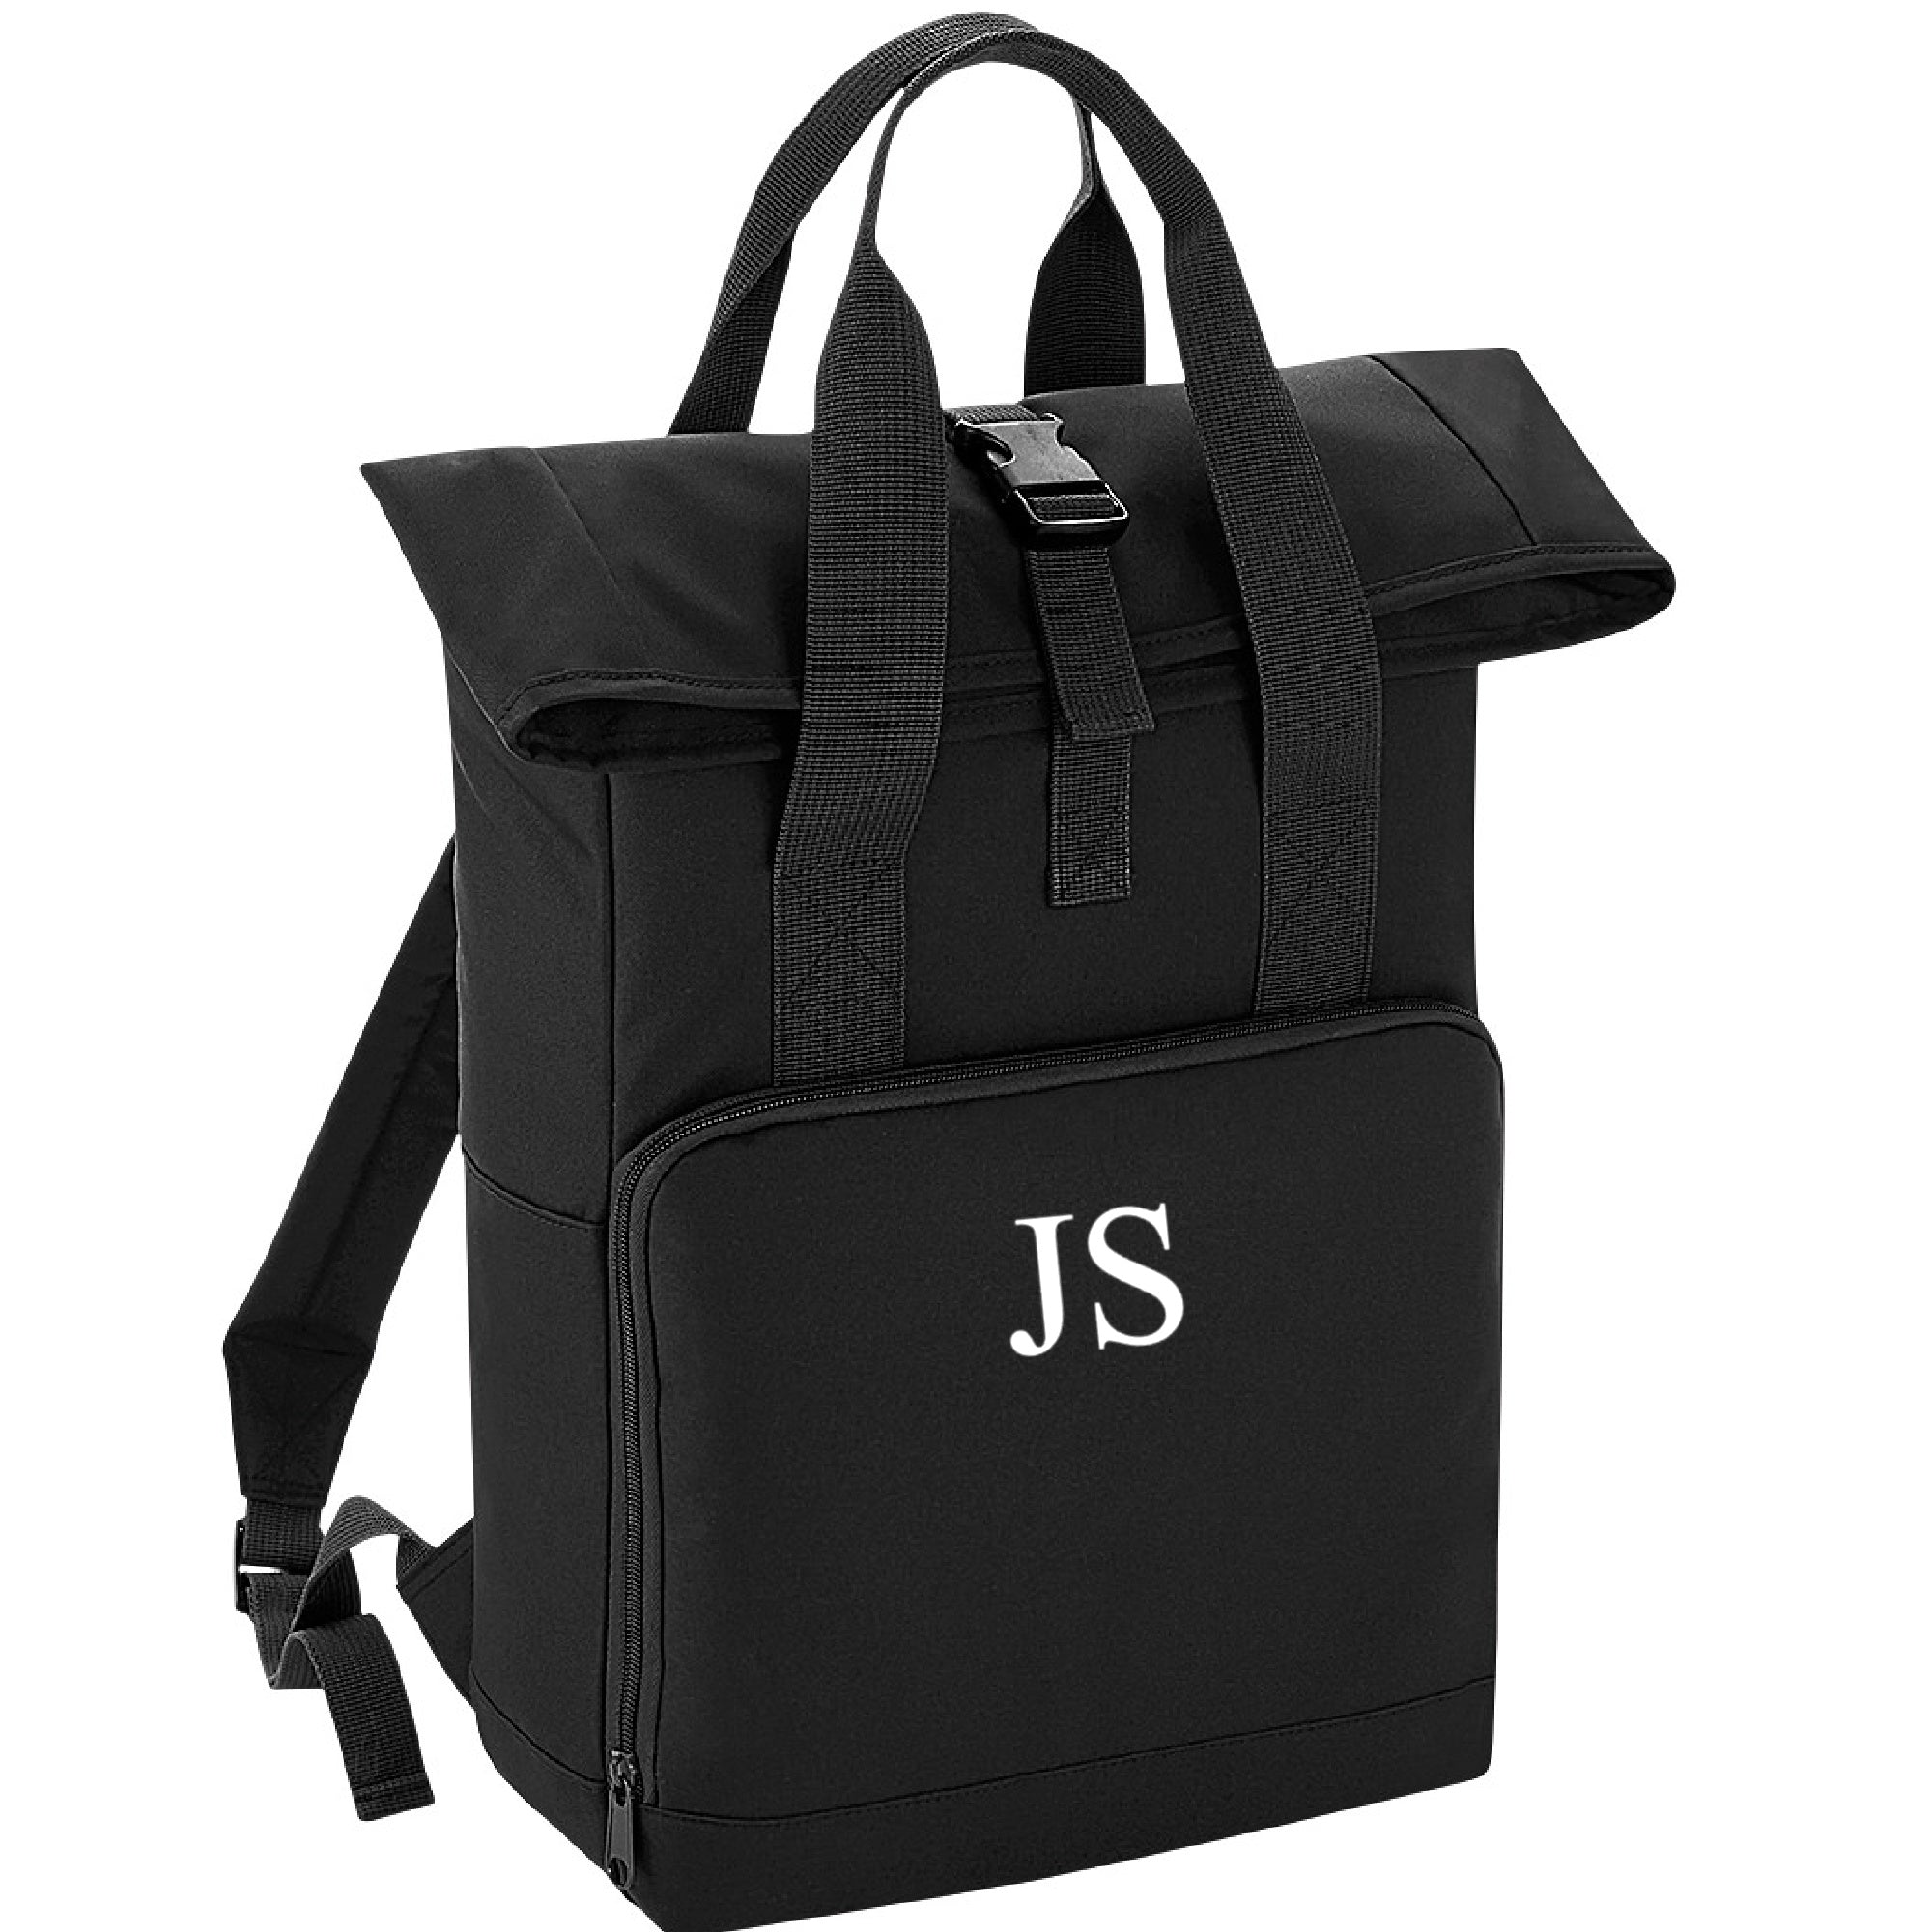 Personalised Roll Top Backpack - Large Twin Handle Rucksack